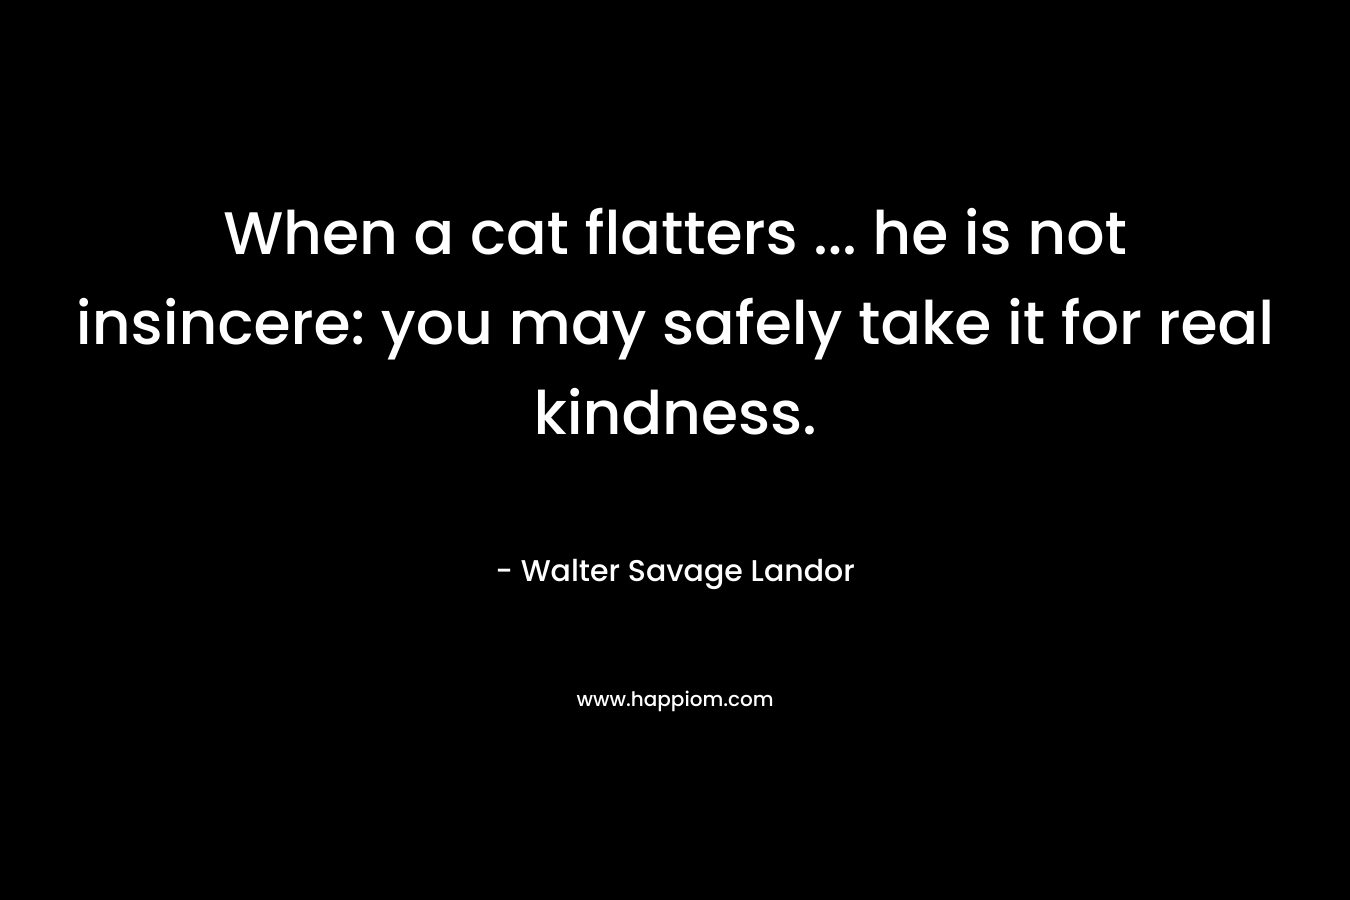 When a cat flatters ... he is not insincere: you may safely take it for real kindness.